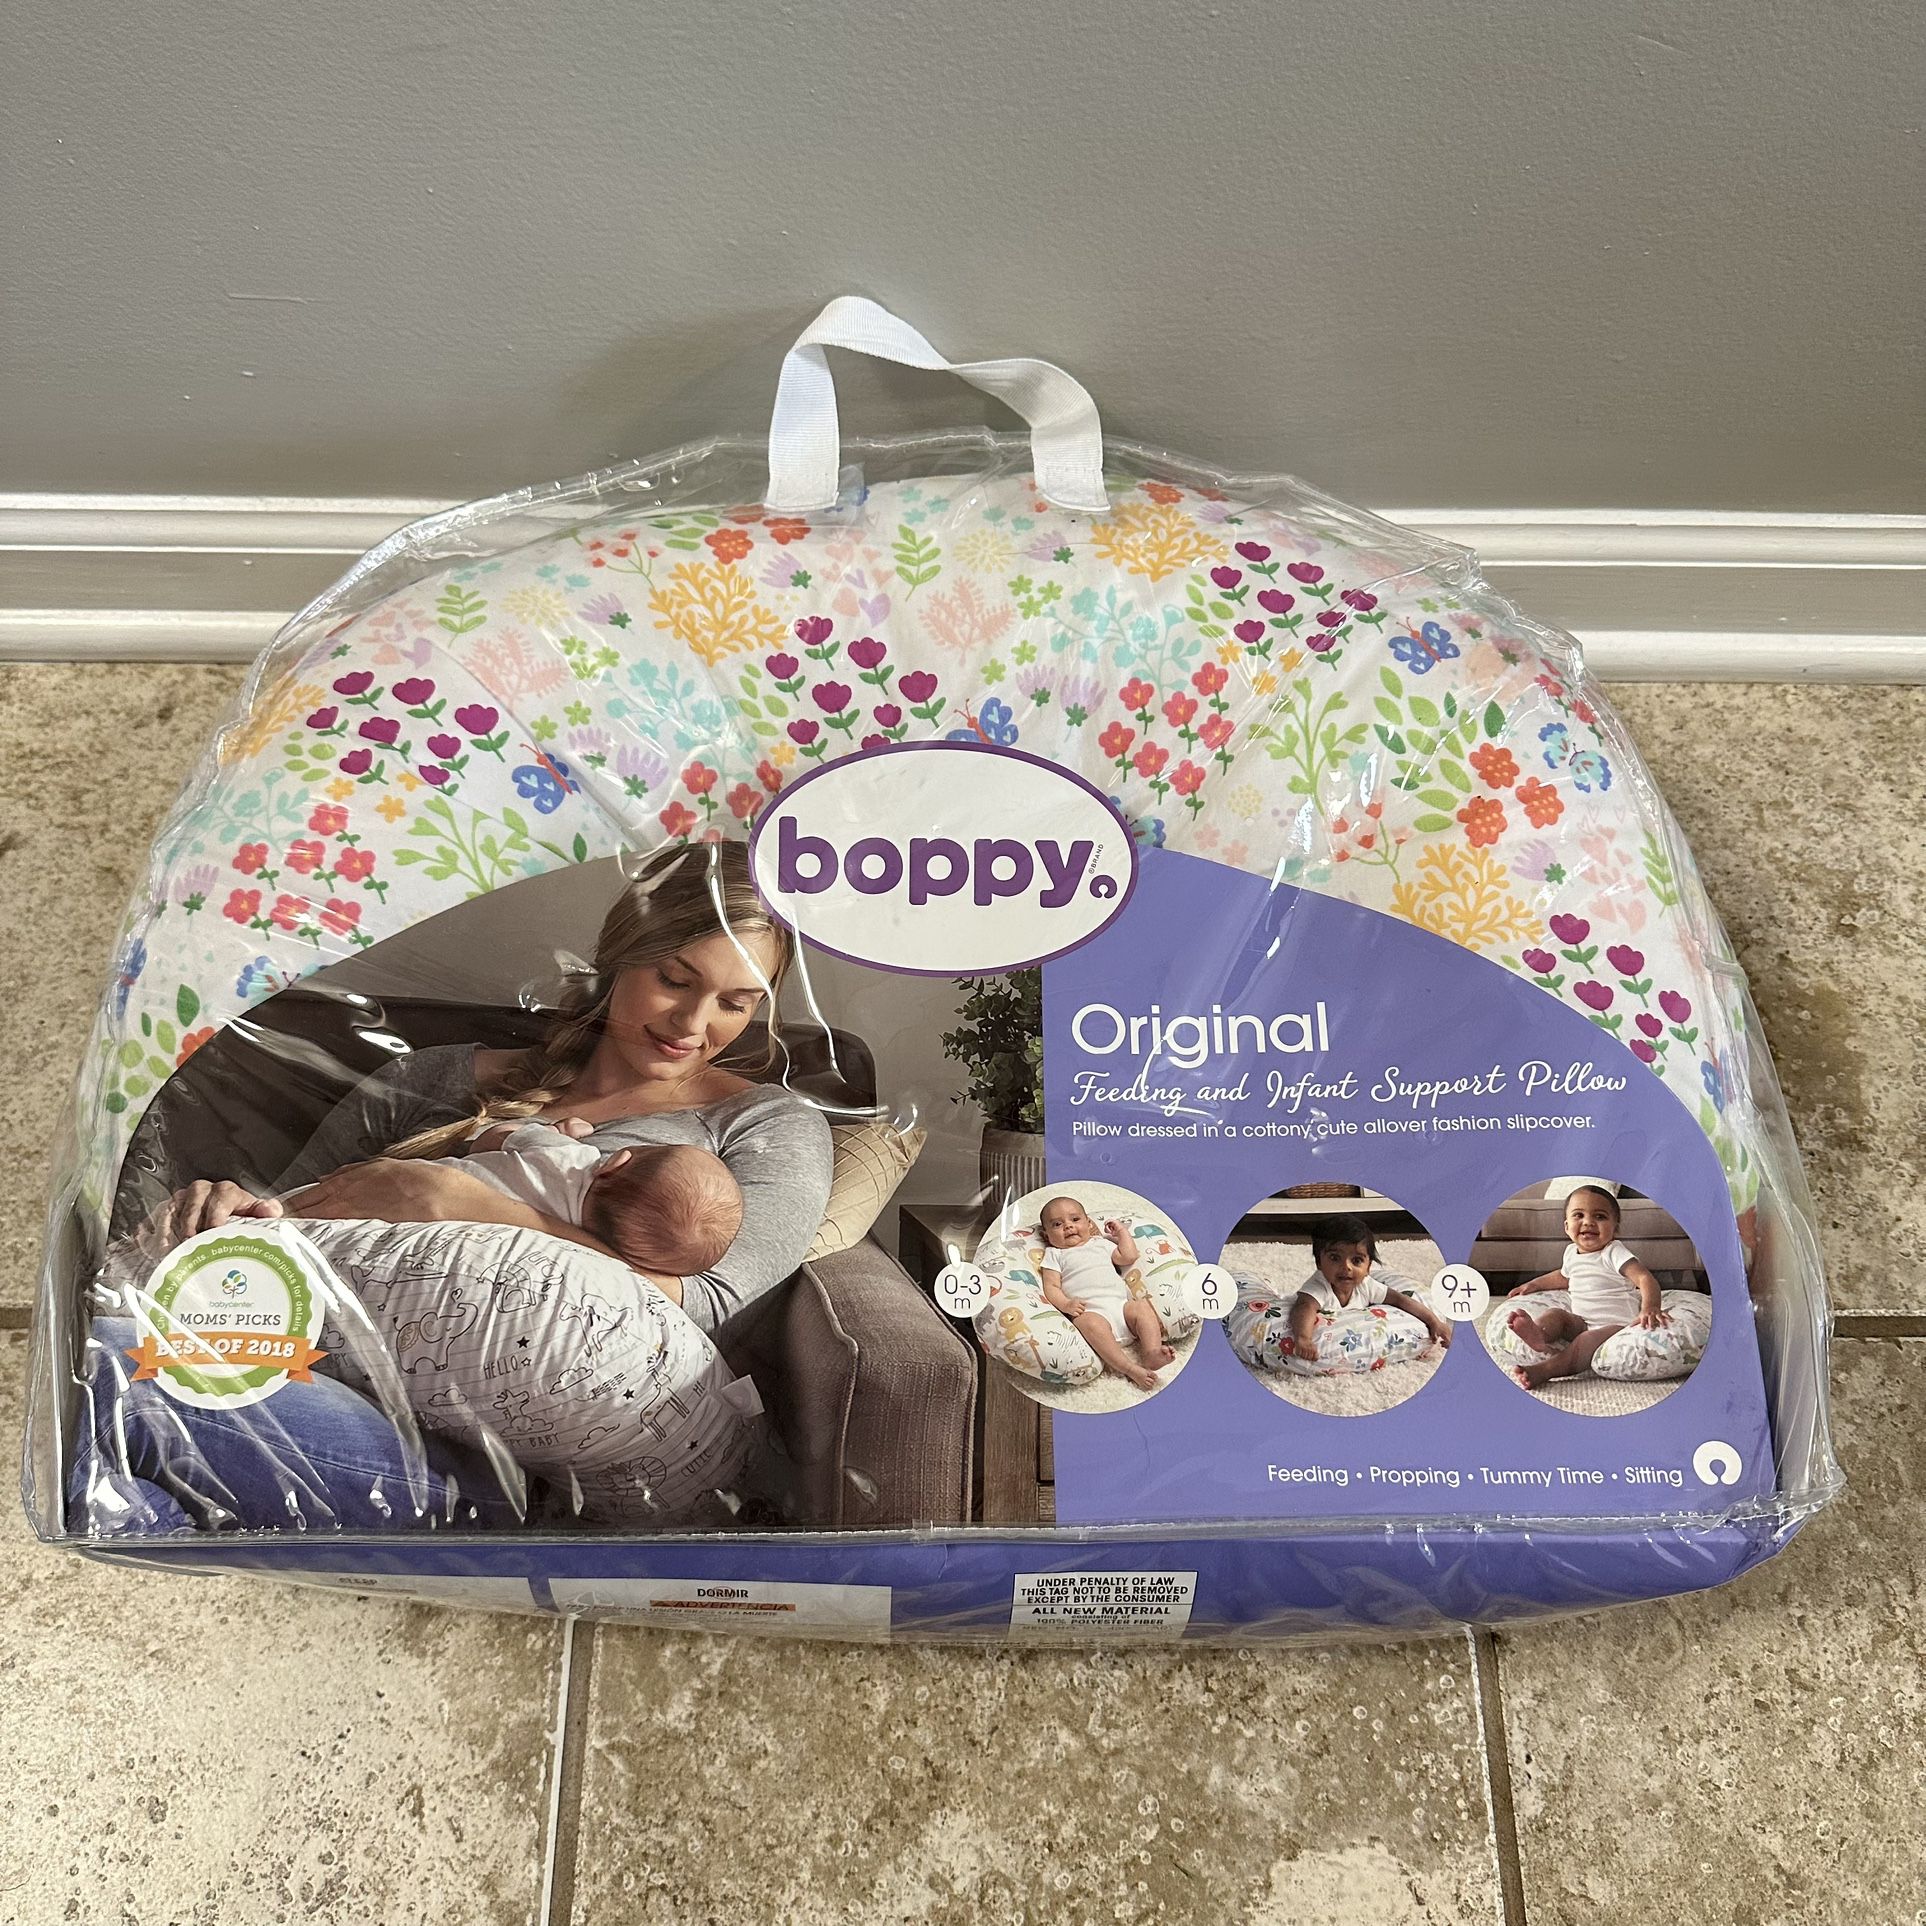 Boppy Original Feeding and Infant Support Pillow - New